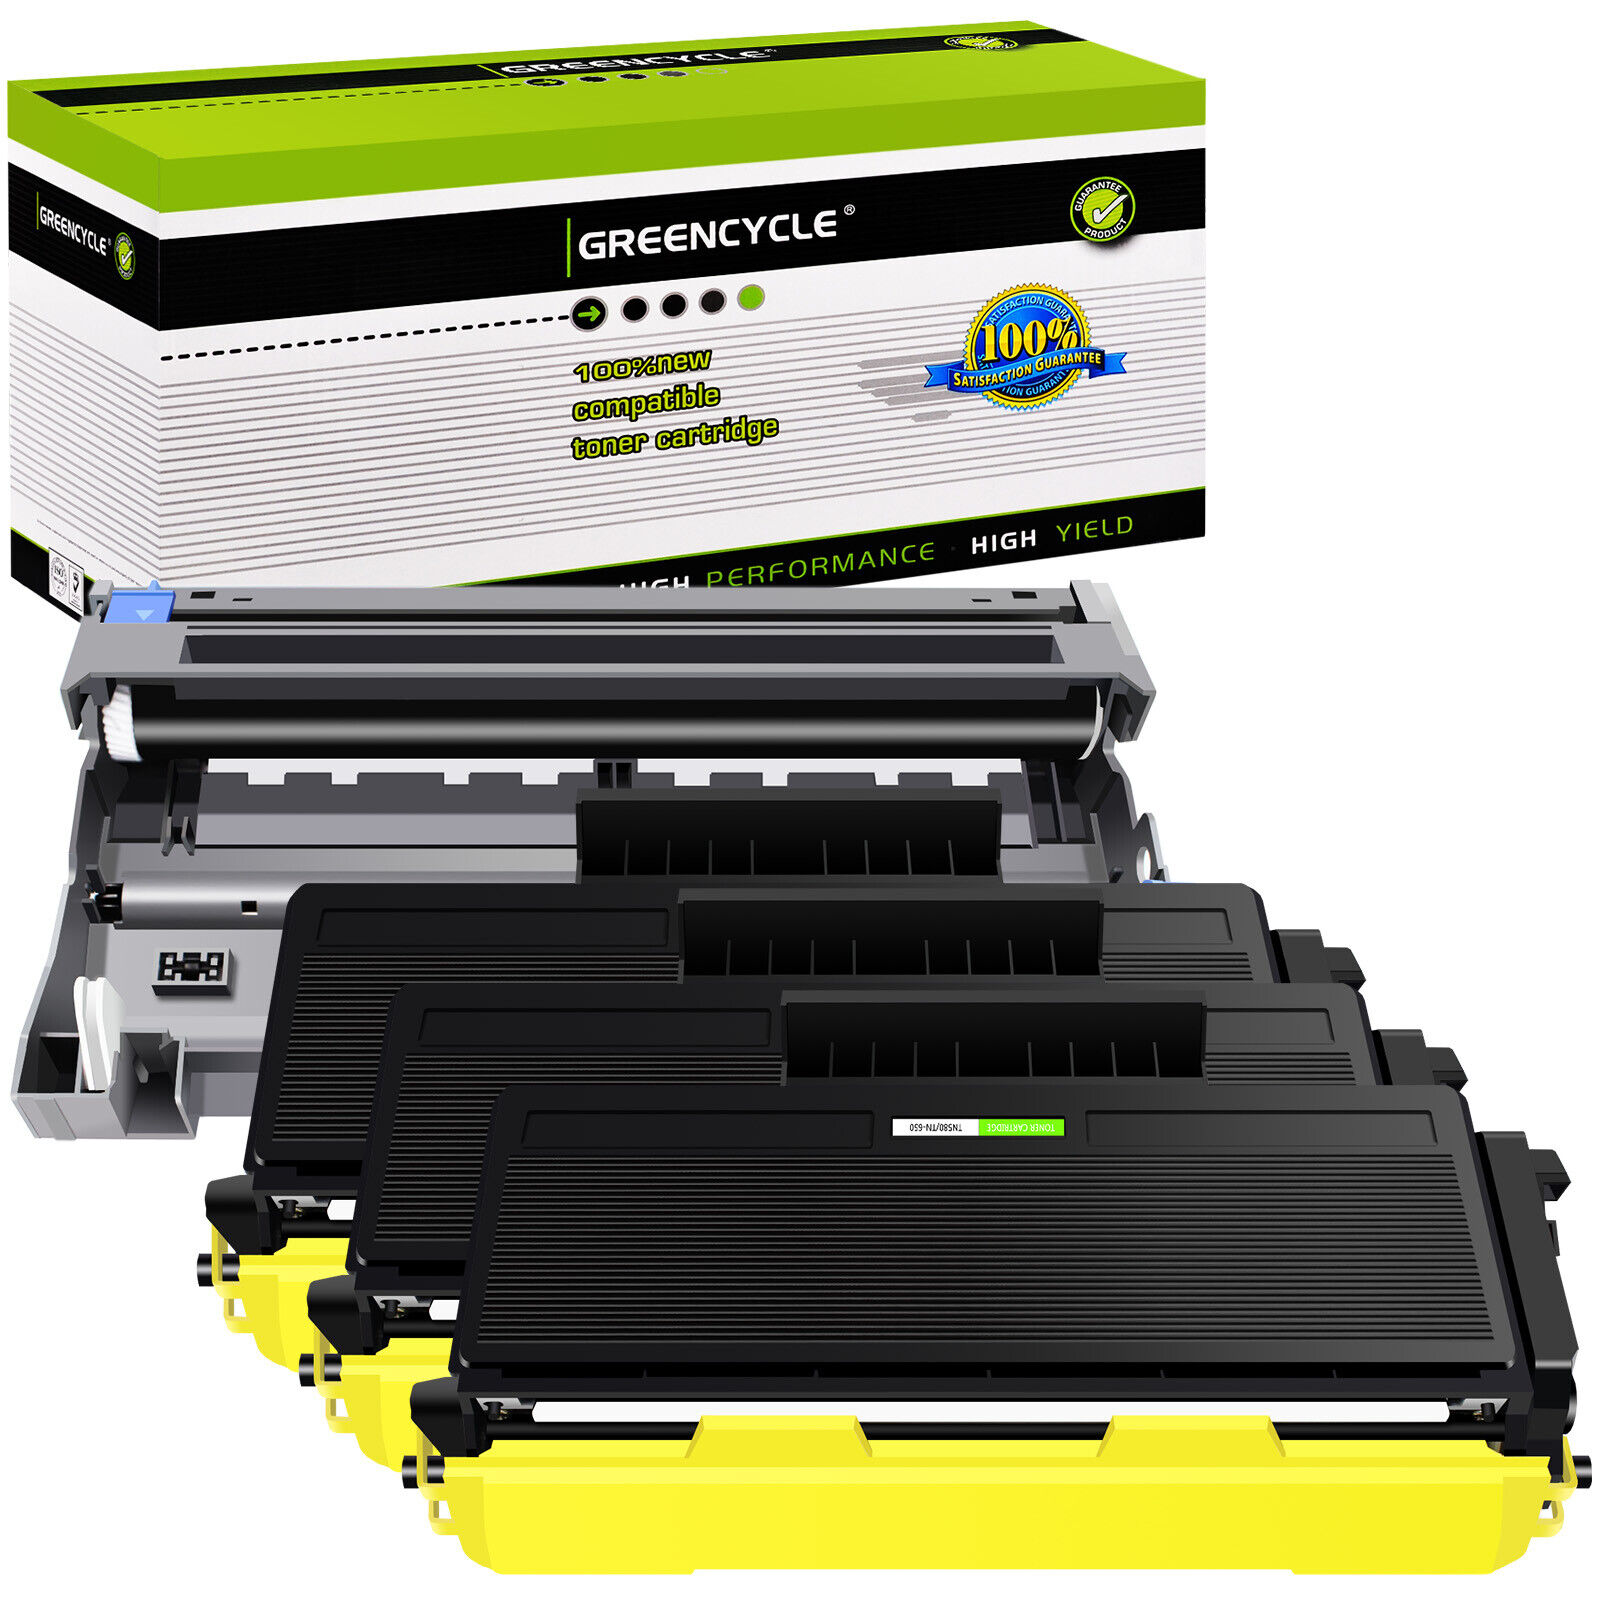 3PK TN580 Toner 1PK DR520 Drum Fits for Brother MFC-8460N/8470DN/8660DN/8670DN